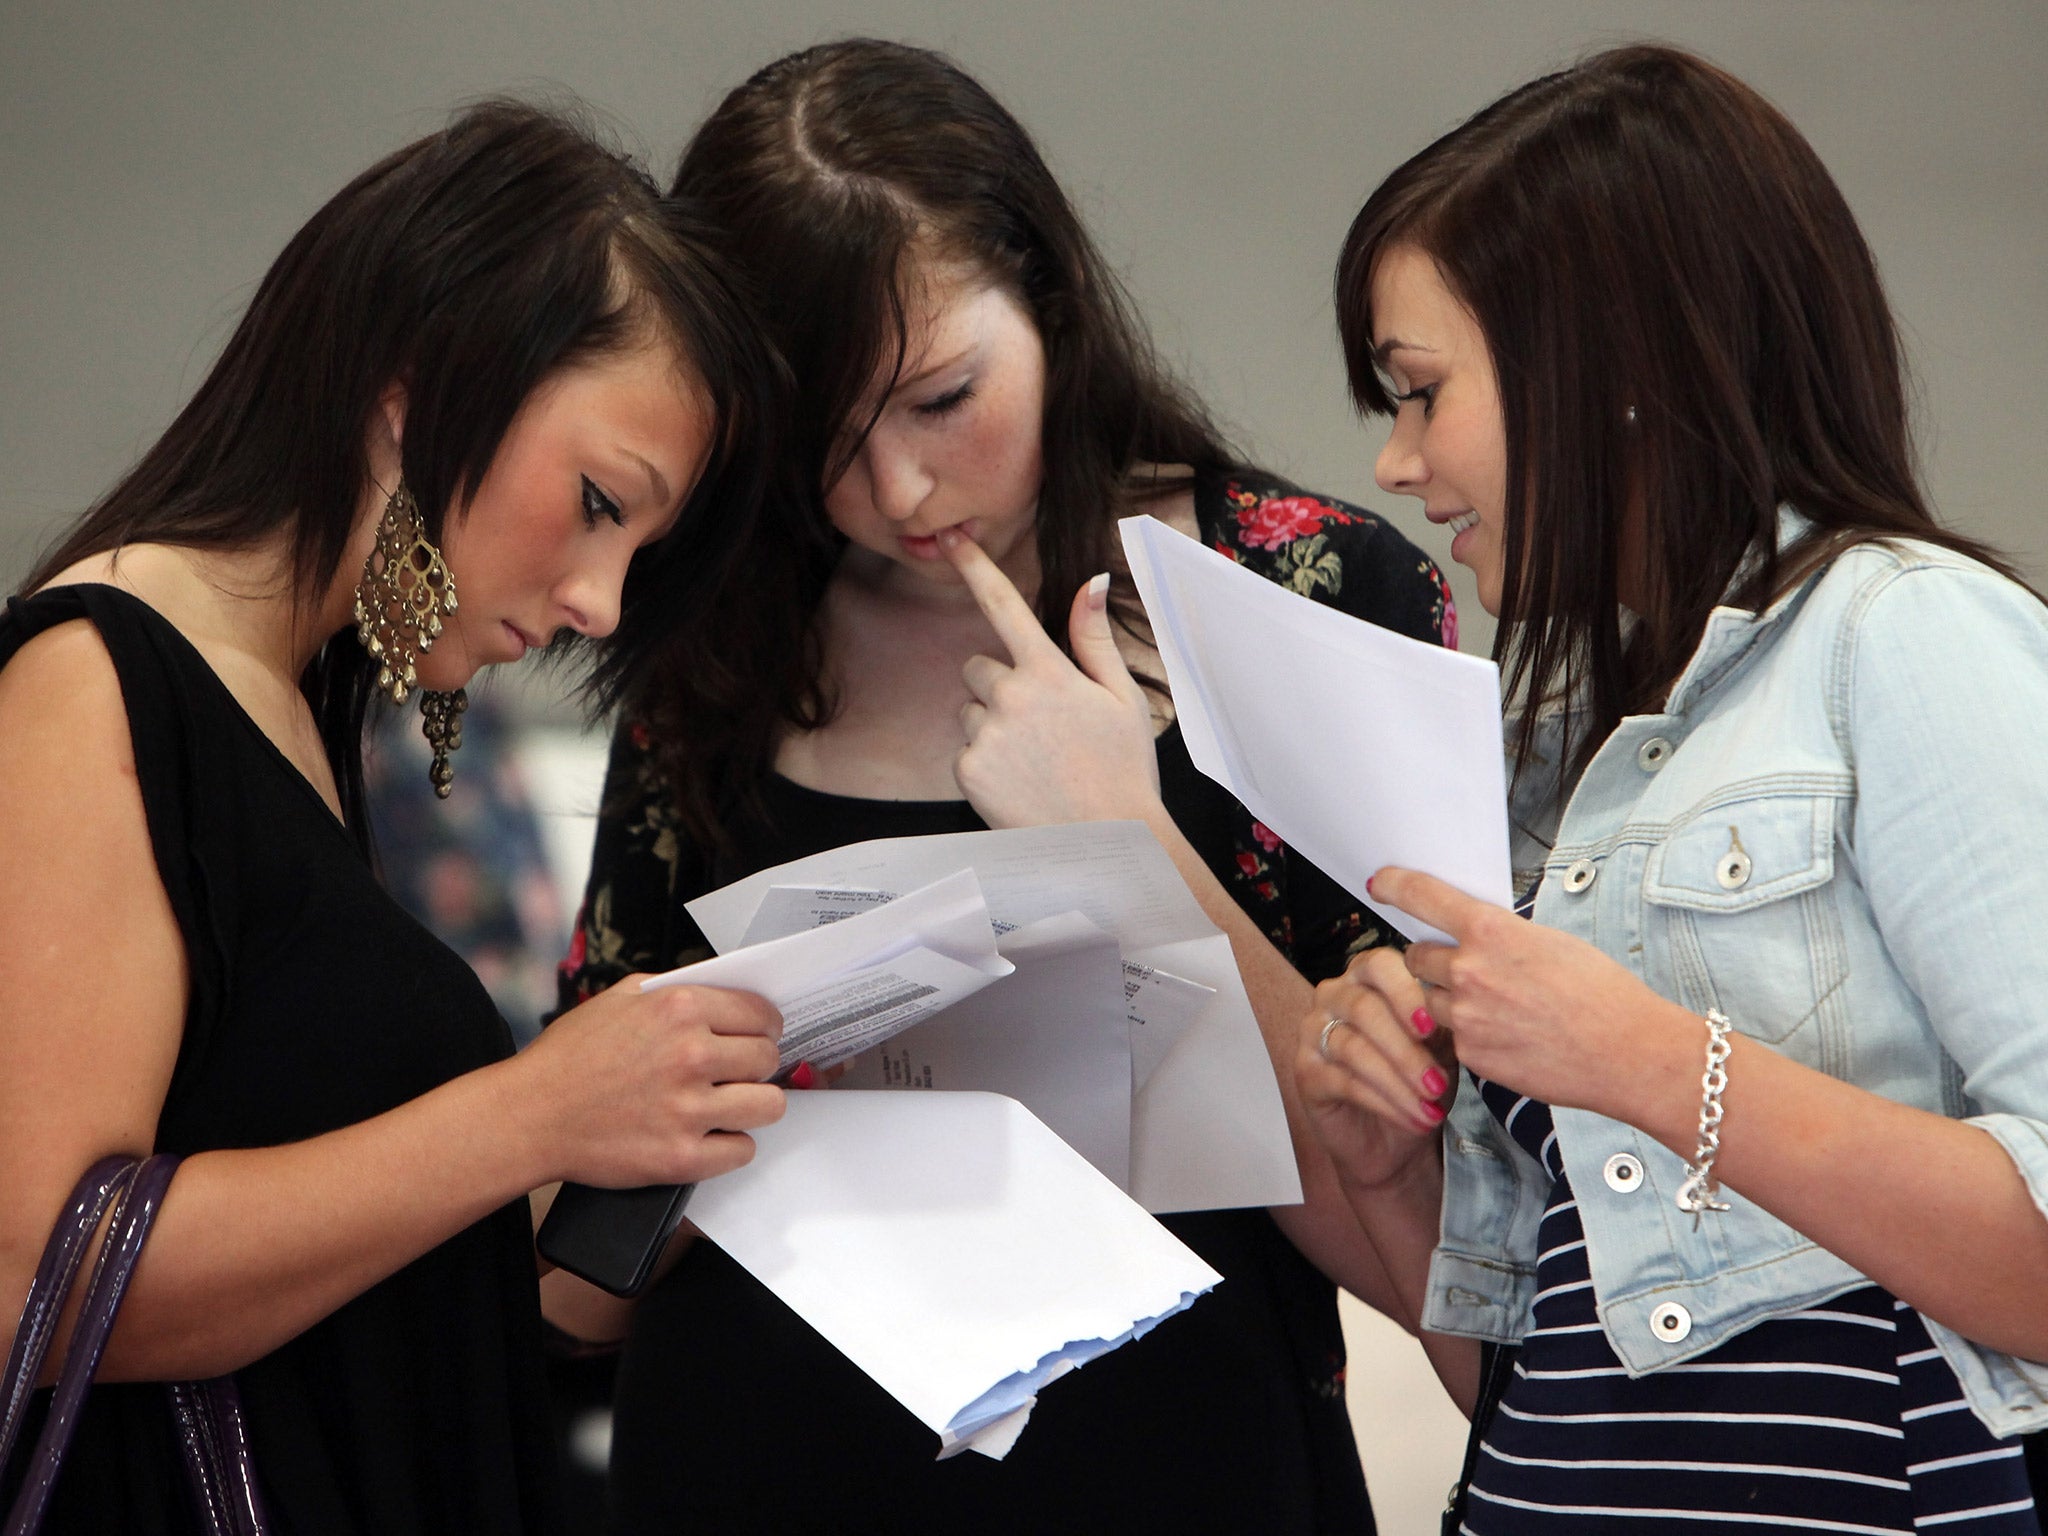 A Level students picking up their results